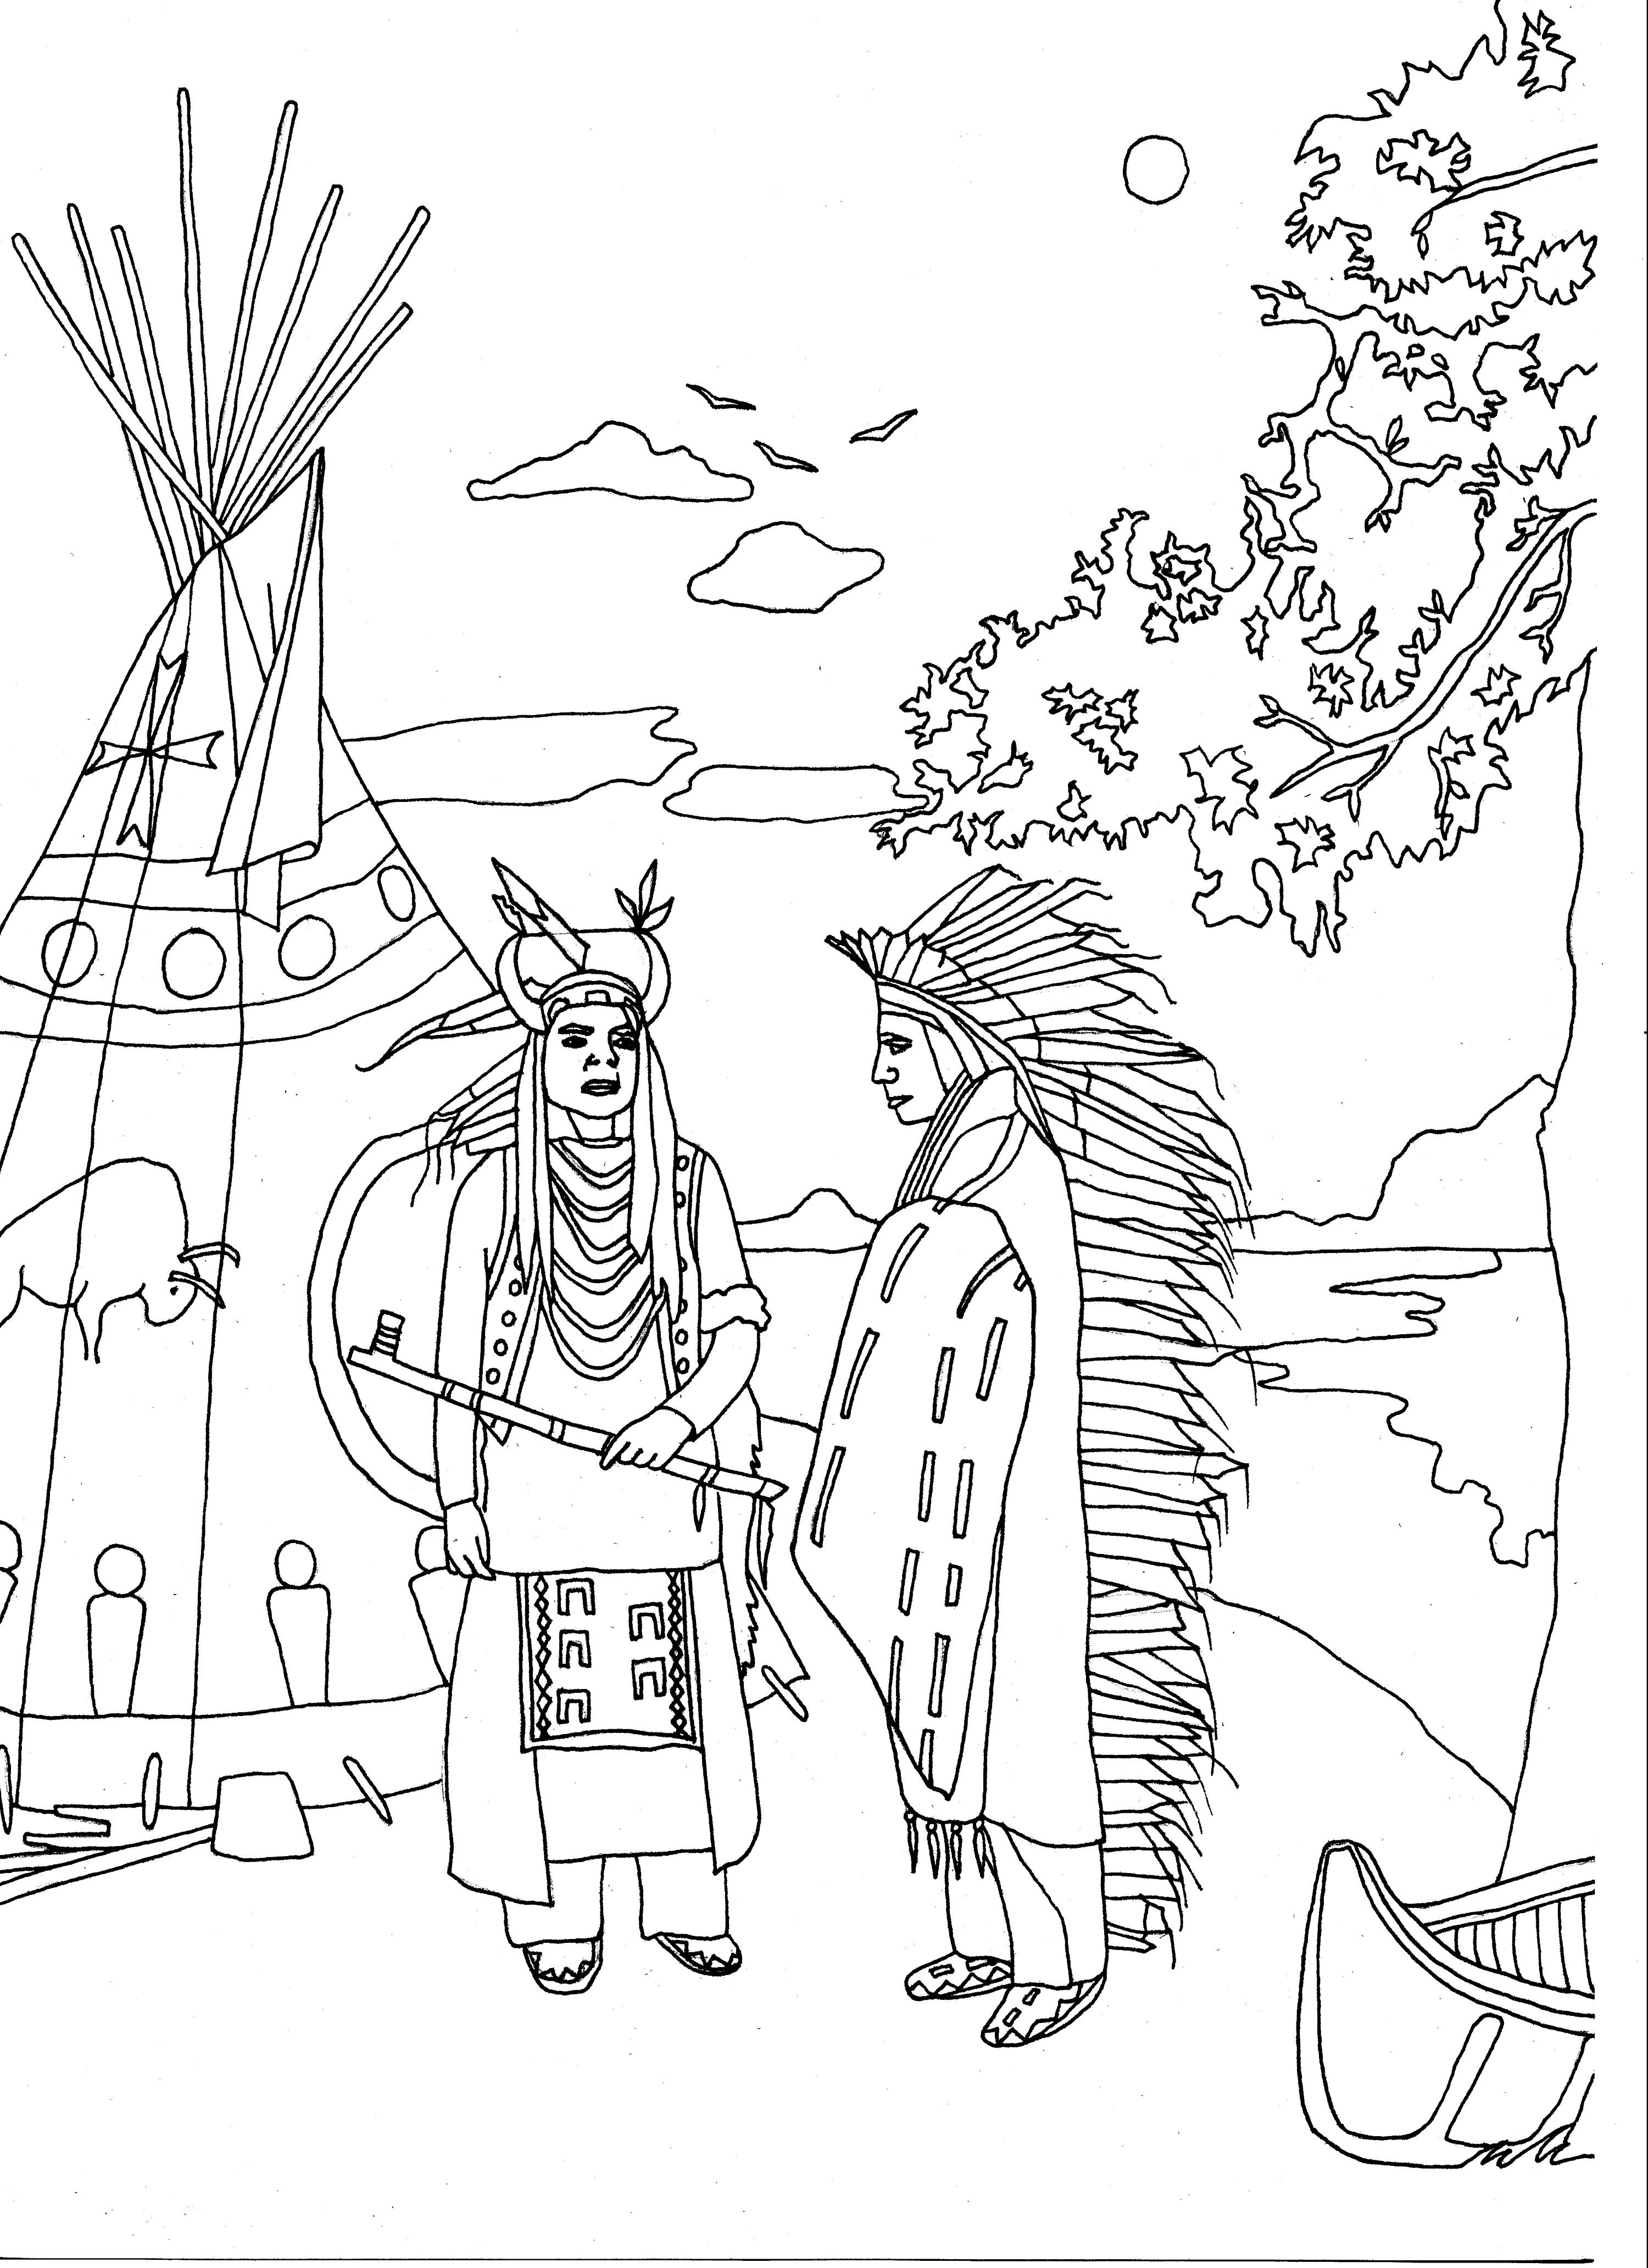 Two native americans - Native American Adult Coloring Pages